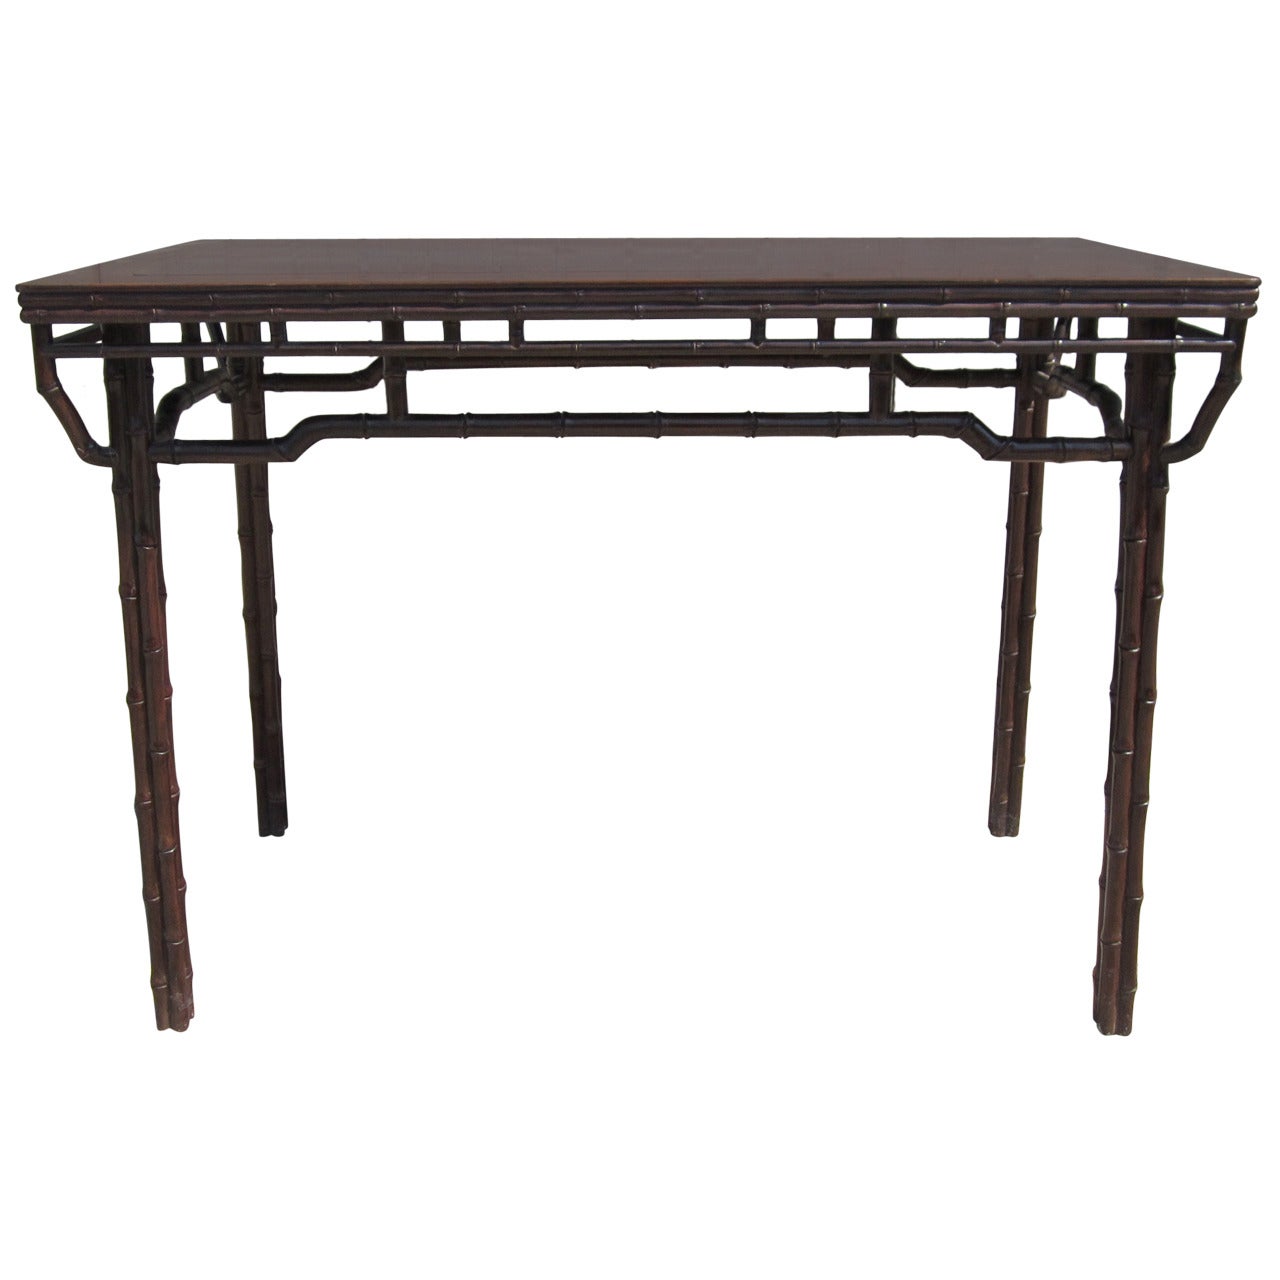 19th Century Chinese Carved Faux Bamboo Console Table 